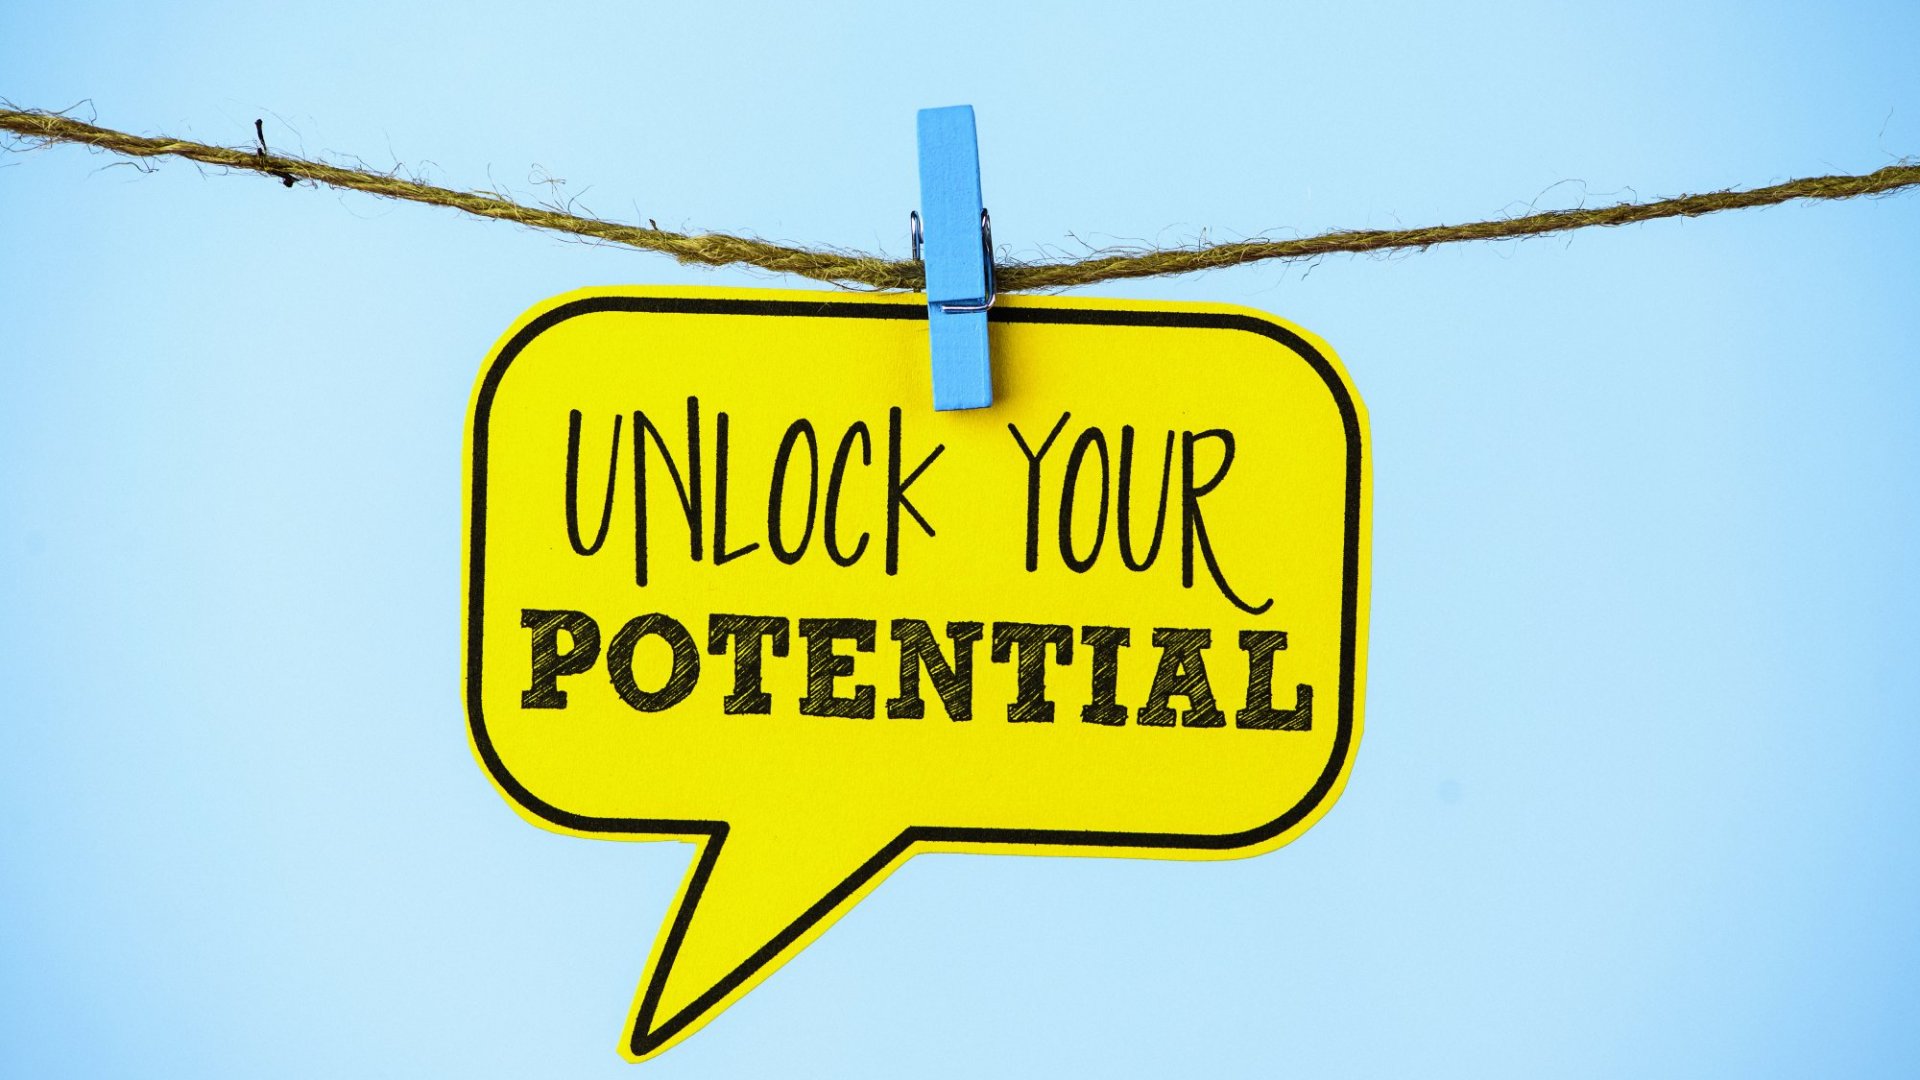 Your ‘Best You’ Already Resides Inside of You: It’s Up to You to Unlock Your True Potential